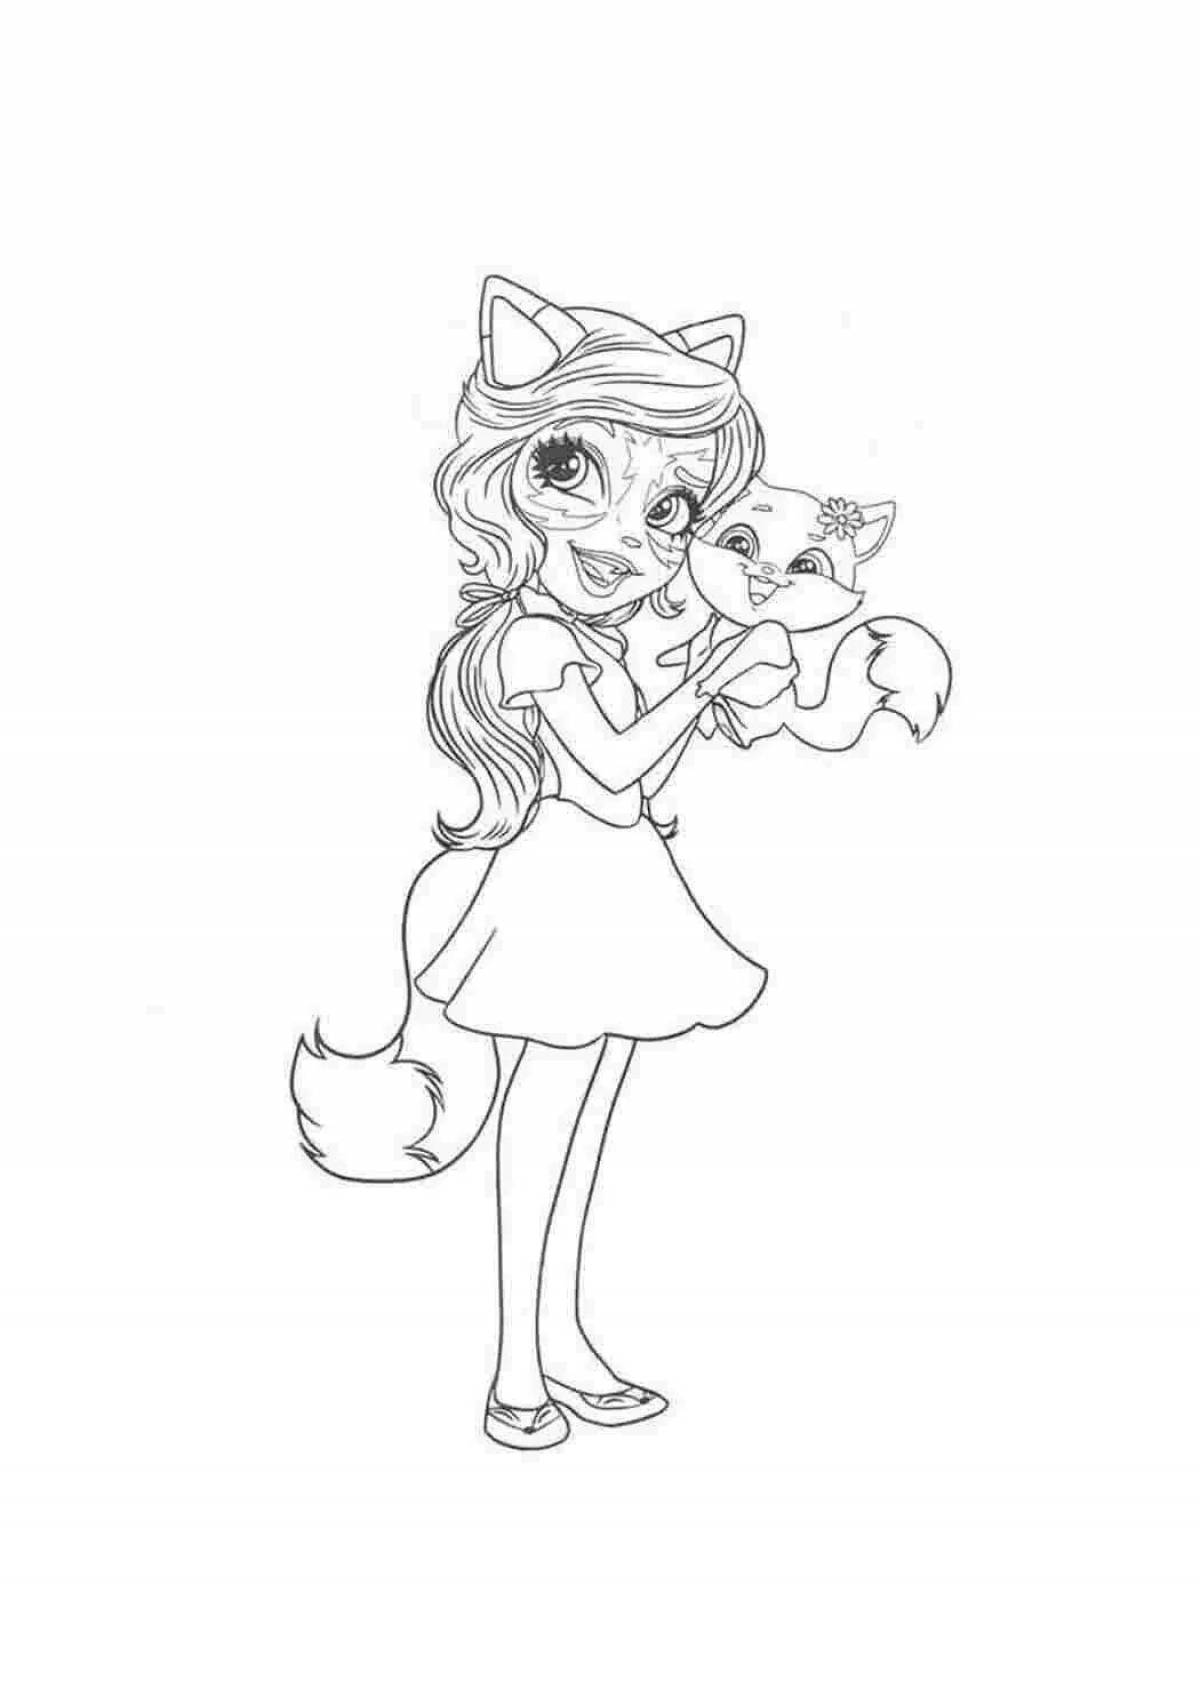 Fairy bunny coloring page